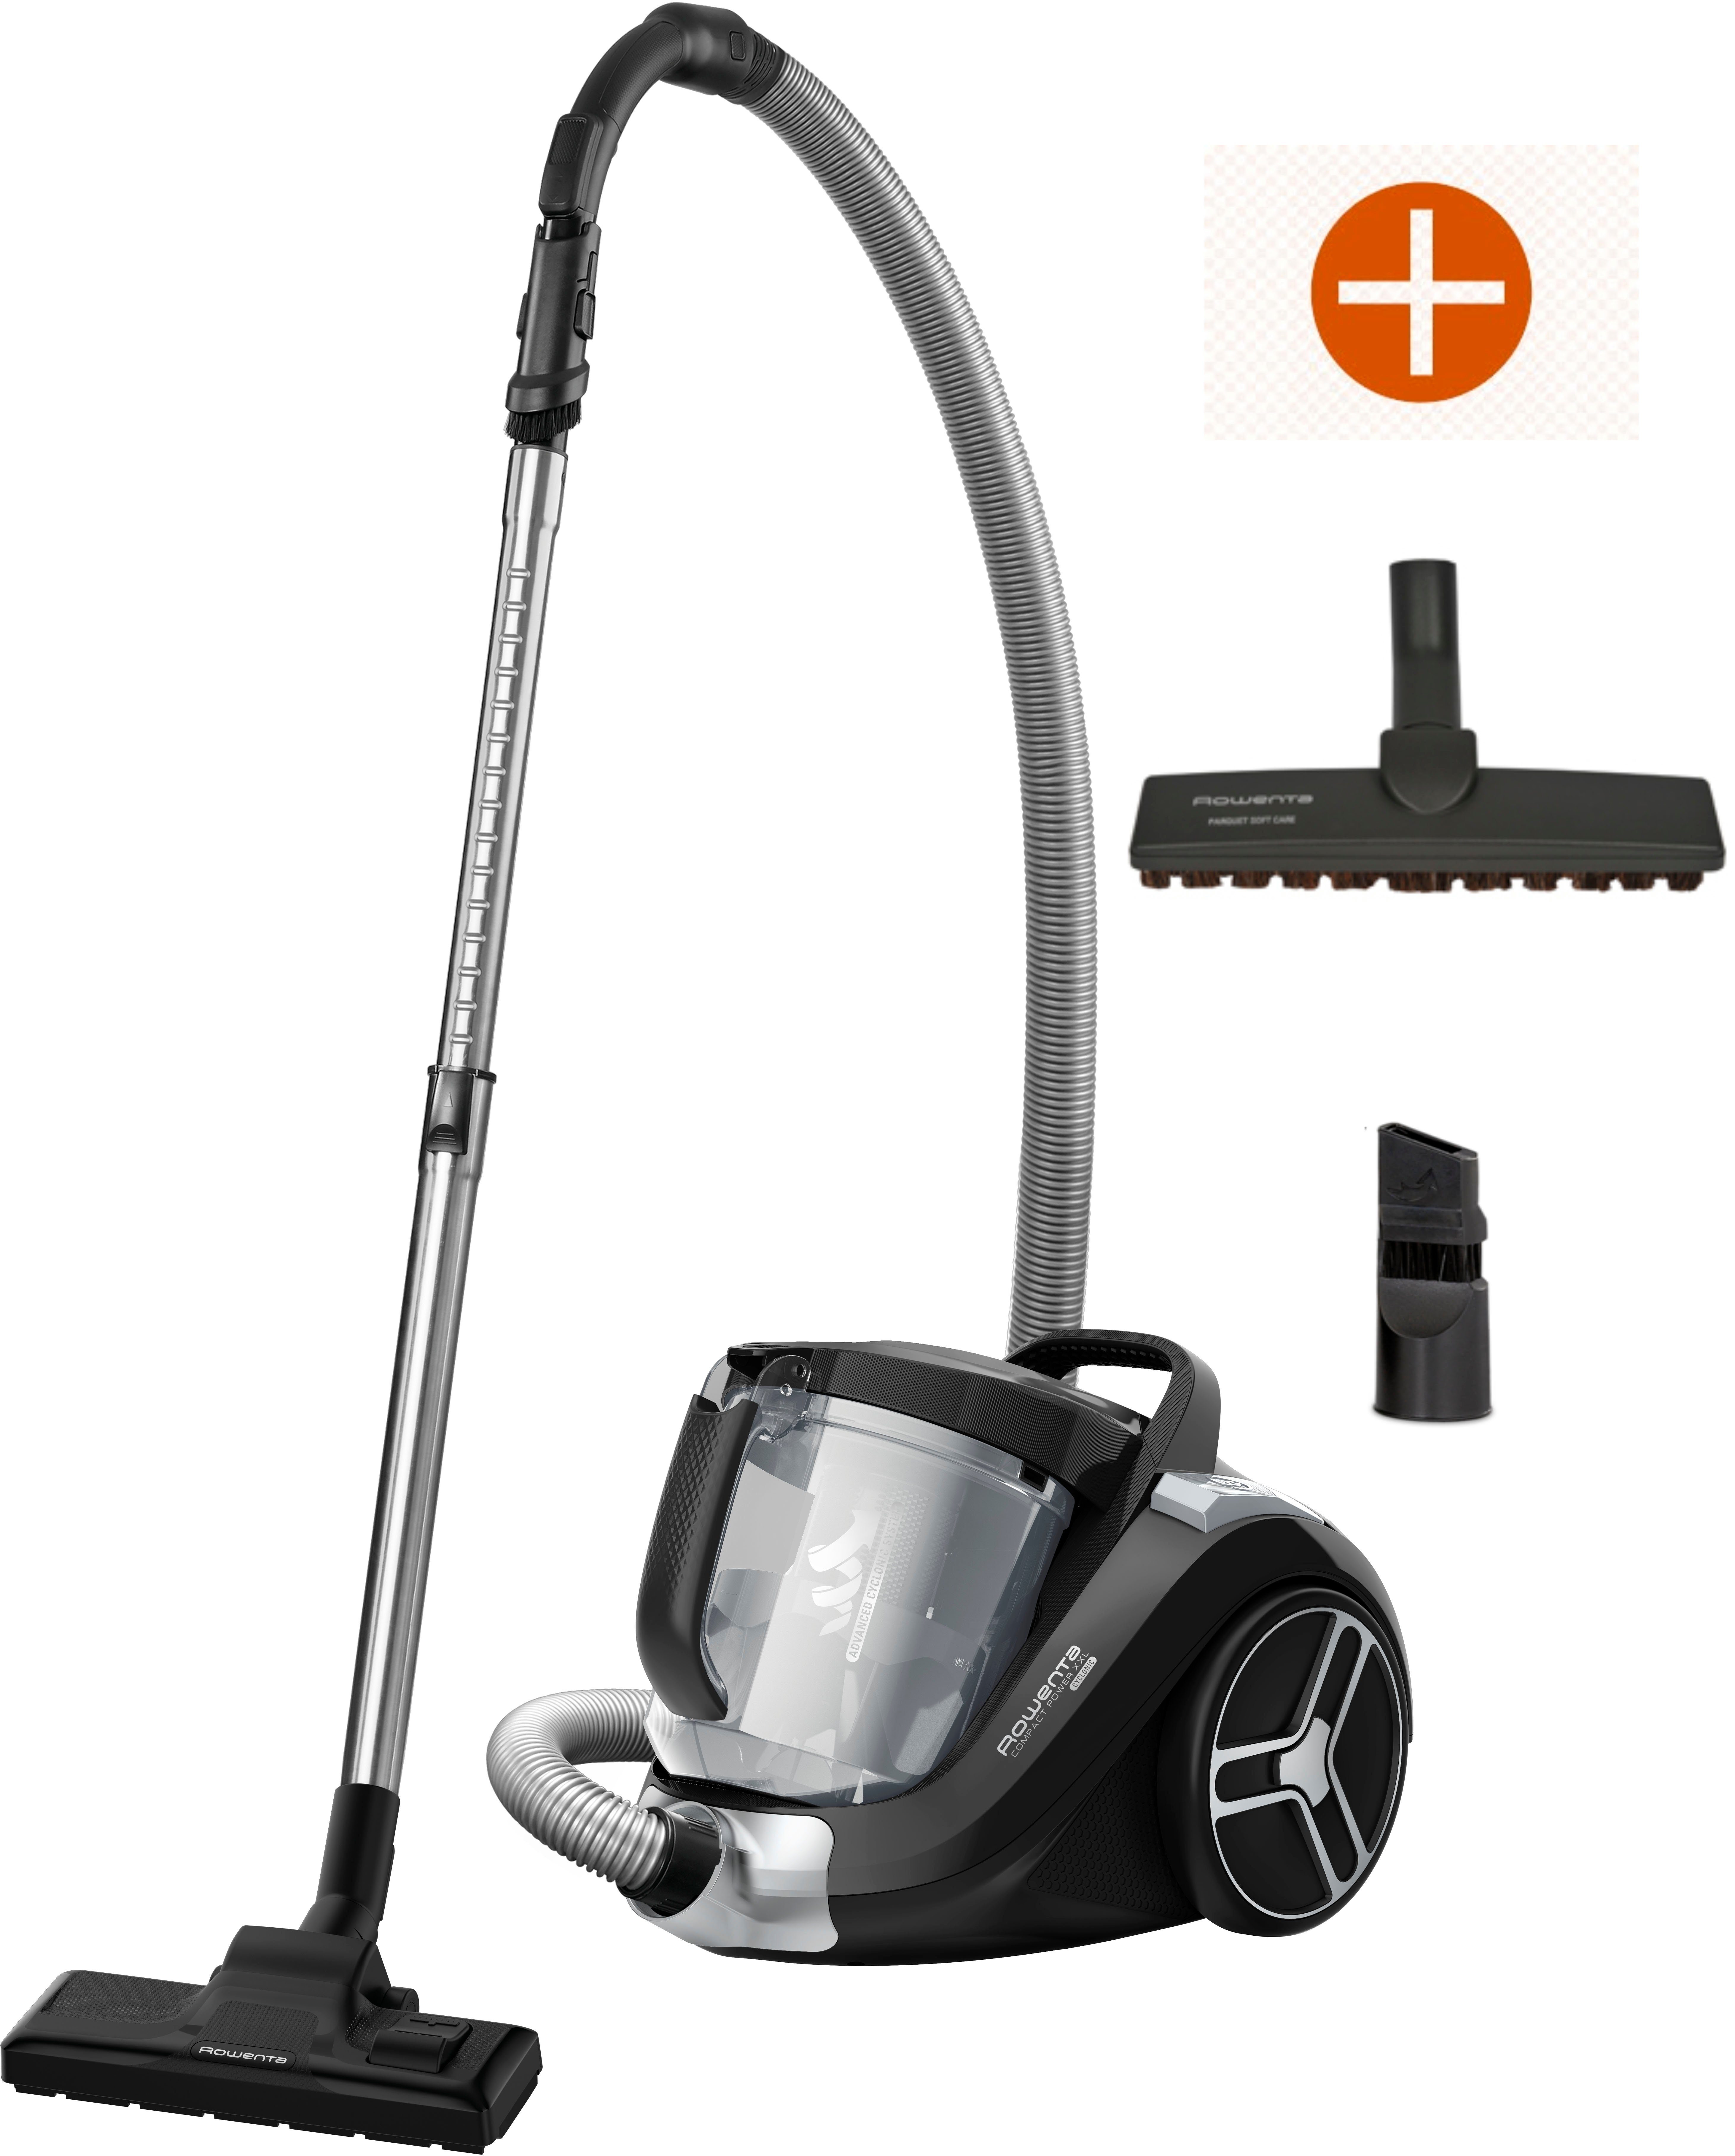 Aspirateur Rowenta Compact Power Xxl In Store, 55% OFF | fames.org.br